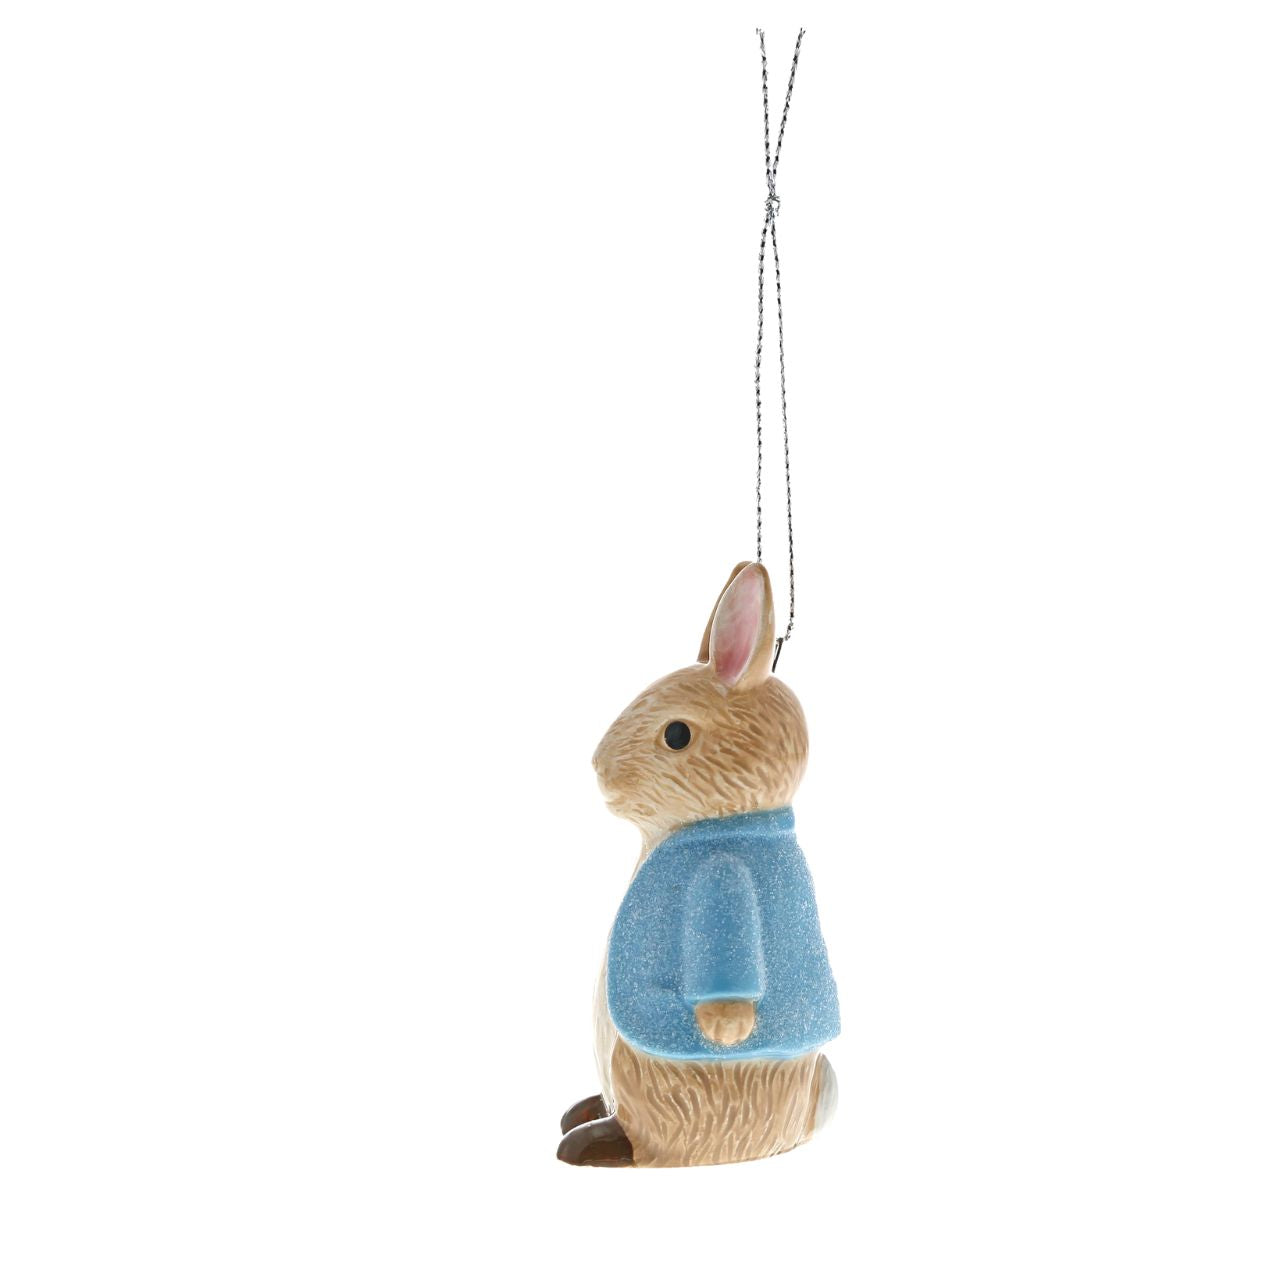 Beatrix Potter Peter Rabbit Sculpted Christmas Hanging Decoration  A beautiful Peter Rabbit Sculpted Hanging Ornament made from fine ceramic and finished with a blue glittering jacket. This Peter Rabbit hanging ornament will make a wonderful finishing touch for all manners of celebrations such as parties or home decorations.